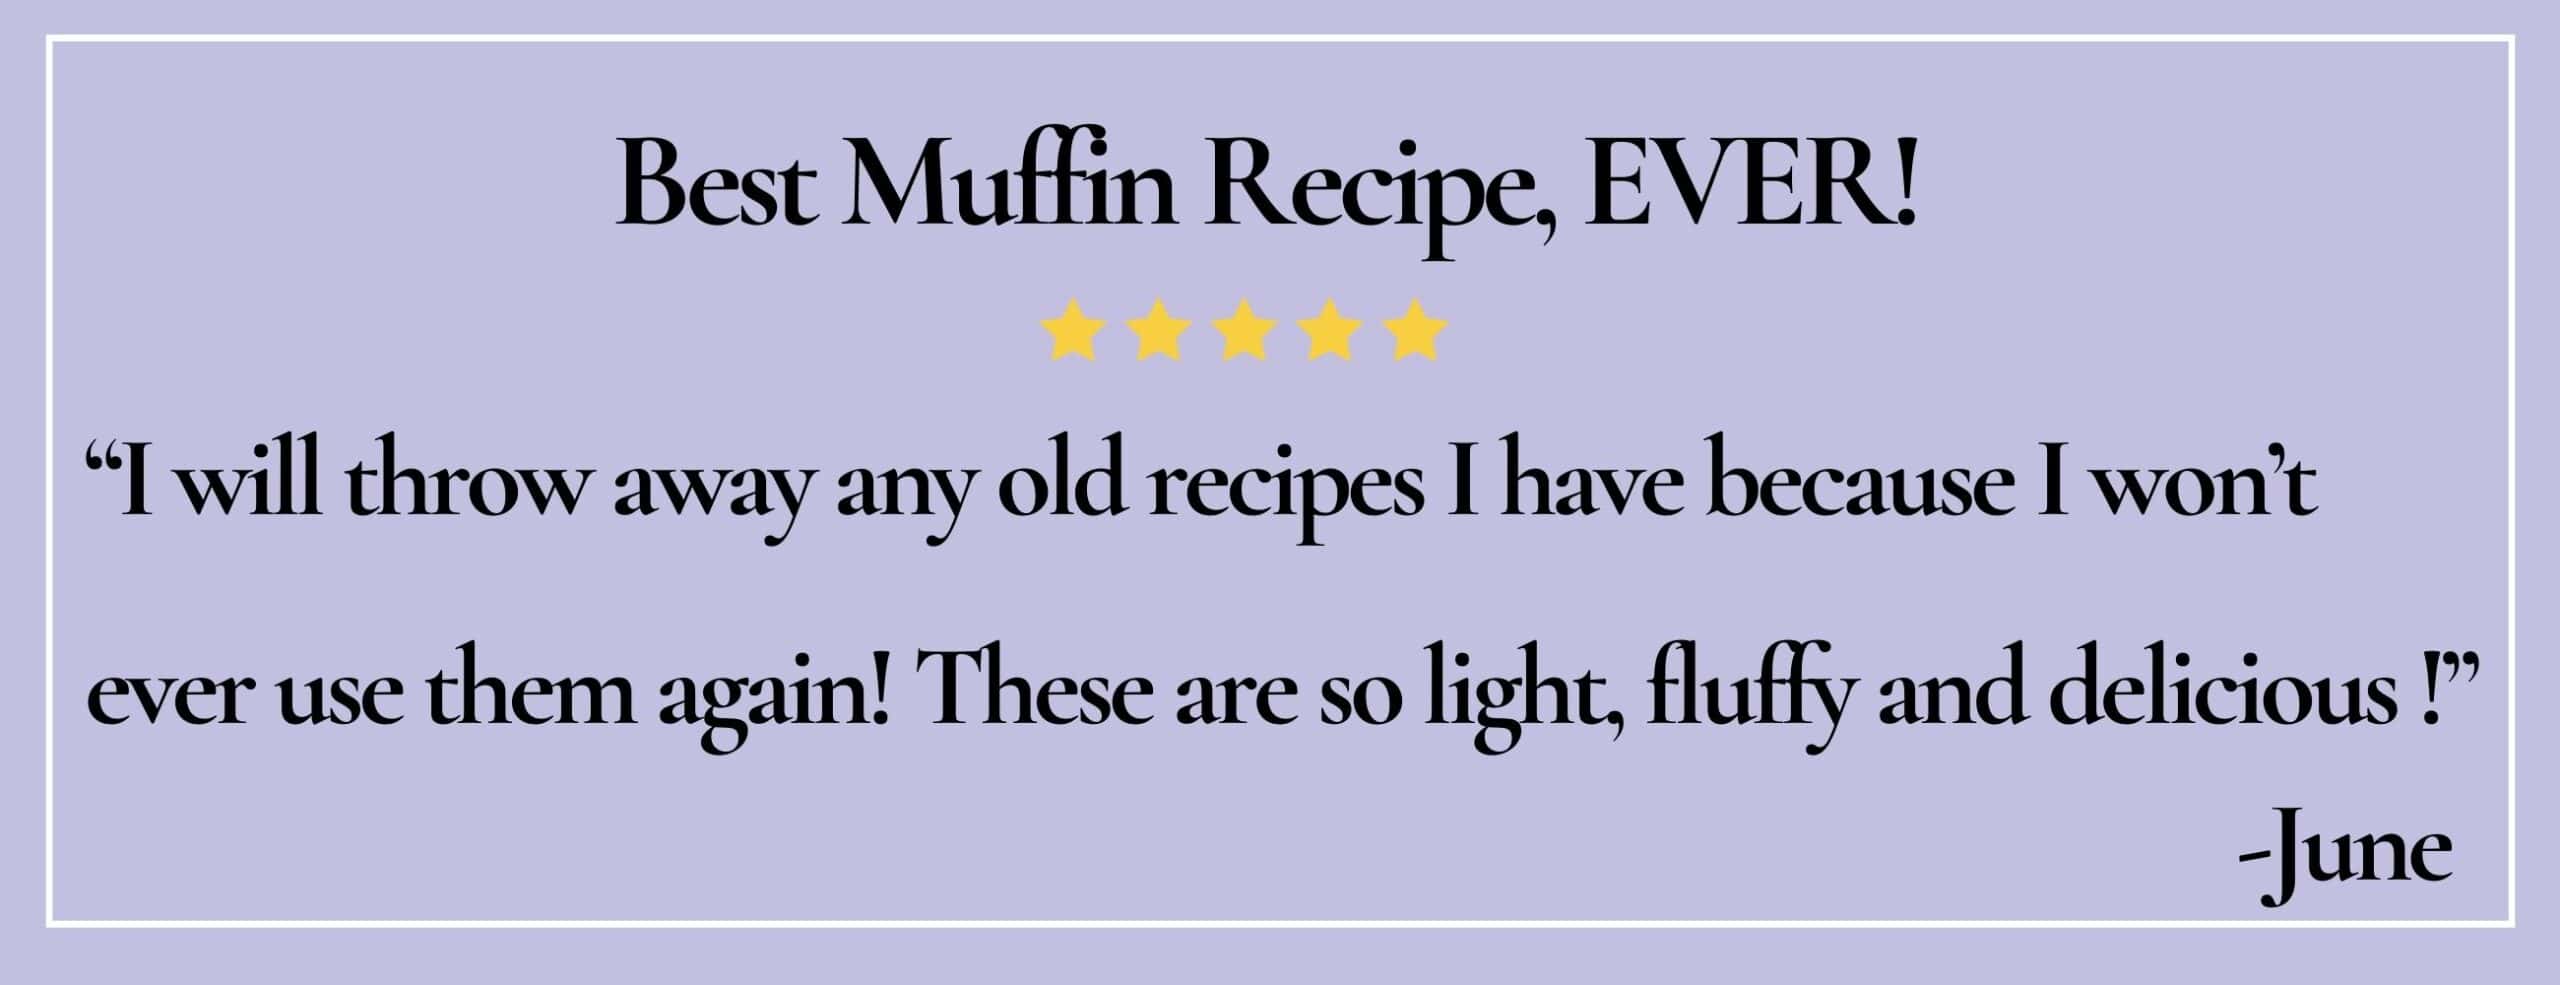 Text box with paraphrase: Best muffin recipe, EVER! These are so light, fluffy and delicious! -June